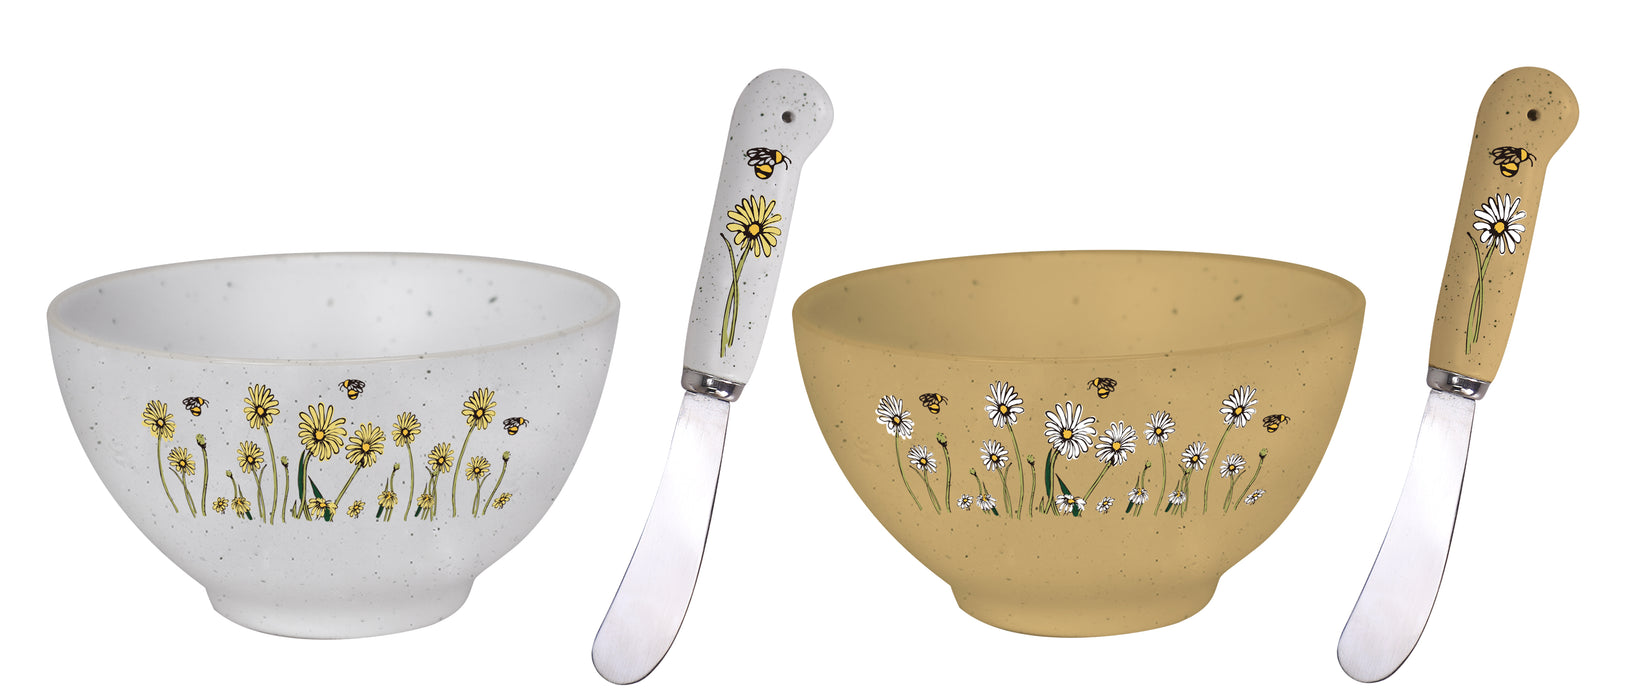 Daisy & Bee Dip Bowl with Spreader